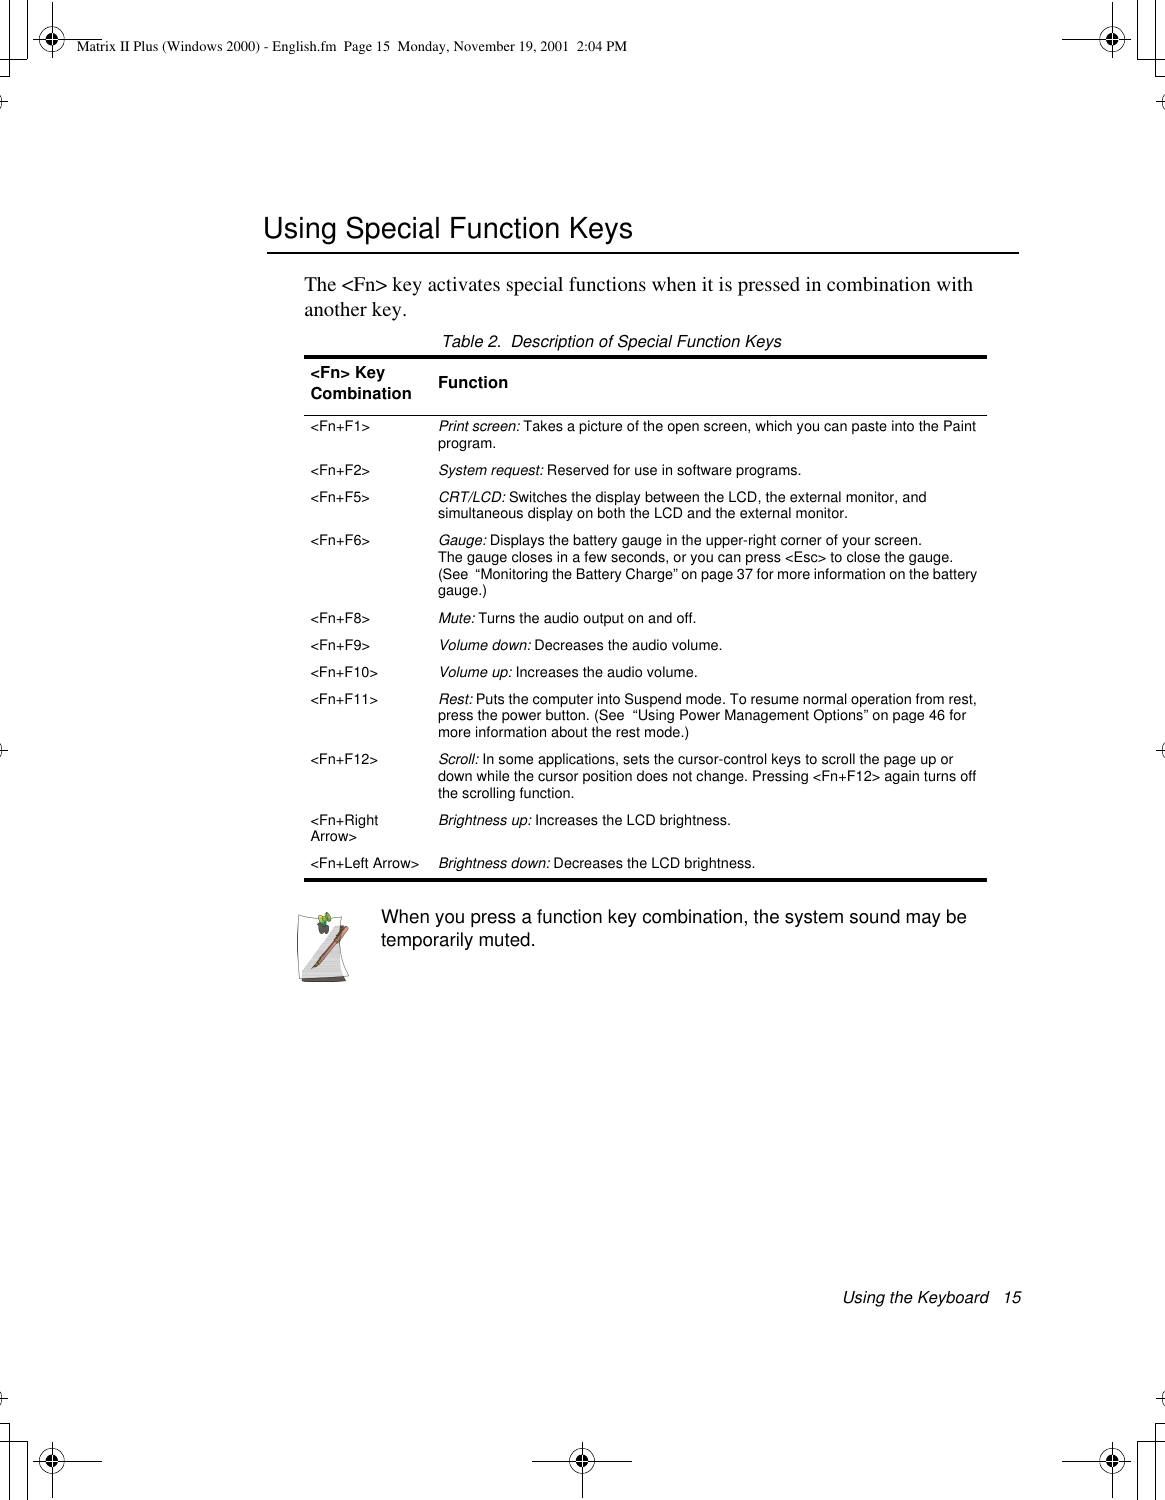 Using the Keyboard   15Using Special Function KeysThe &lt;Fn&gt; key activates special functions when it is pressed in combination with another key. Table 2.  Description of Special Function KeysWhen you press a function key combination, the system sound may be temporarily muted.&lt;Fn&gt; Key Combination Function&lt;Fn+F1&gt; Print screen: Takes a picture of the open screen, which you can paste into the Paint program.&lt;Fn+F2&gt; System request: Reserved for use in software programs.&lt;Fn+F5&gt;  CRT/LCD: Switches the display between the LCD, the external monitor, and simultaneous display on both the LCD and the external monitor.&lt;Fn+F6&gt; Gauge: Displays the battery gauge in the upper-right corner of your screen. The gauge closes in a few seconds, or you can press &lt;Esc&gt; to close the gauge. (See  “Monitoring the Battery Charge” on page 37 for more information on the battery gauge.) &lt;Fn+F8&gt; Mute: Turns the audio output on and off.&lt;Fn+F9&gt; Volume down: Decreases the audio volume.&lt;Fn+F10&gt; Volume up: Increases the audio volume.&lt;Fn+F11&gt;  Rest: Puts the computer into Suspend mode. To resume normal operation from rest, press the power button. (See  “Using Power Management Options” on page 46 for more information about the rest mode.)&lt;Fn+F12&gt; Scroll: In some applications, sets the cursor-control keys to scroll the page up or down while the cursor position does not change. Pressing &lt;Fn+F12&gt; again turns off the scrolling function. &lt;Fn+Right Arrow&gt; Brightness up: Increases the LCD brightness. &lt;Fn+Left Arrow&gt; Brightness down: Decreases the LCD brightness. Matrix II Plus (Windows 2000) - English.fm  Page 15  Monday, November 19, 2001  2:04 PM